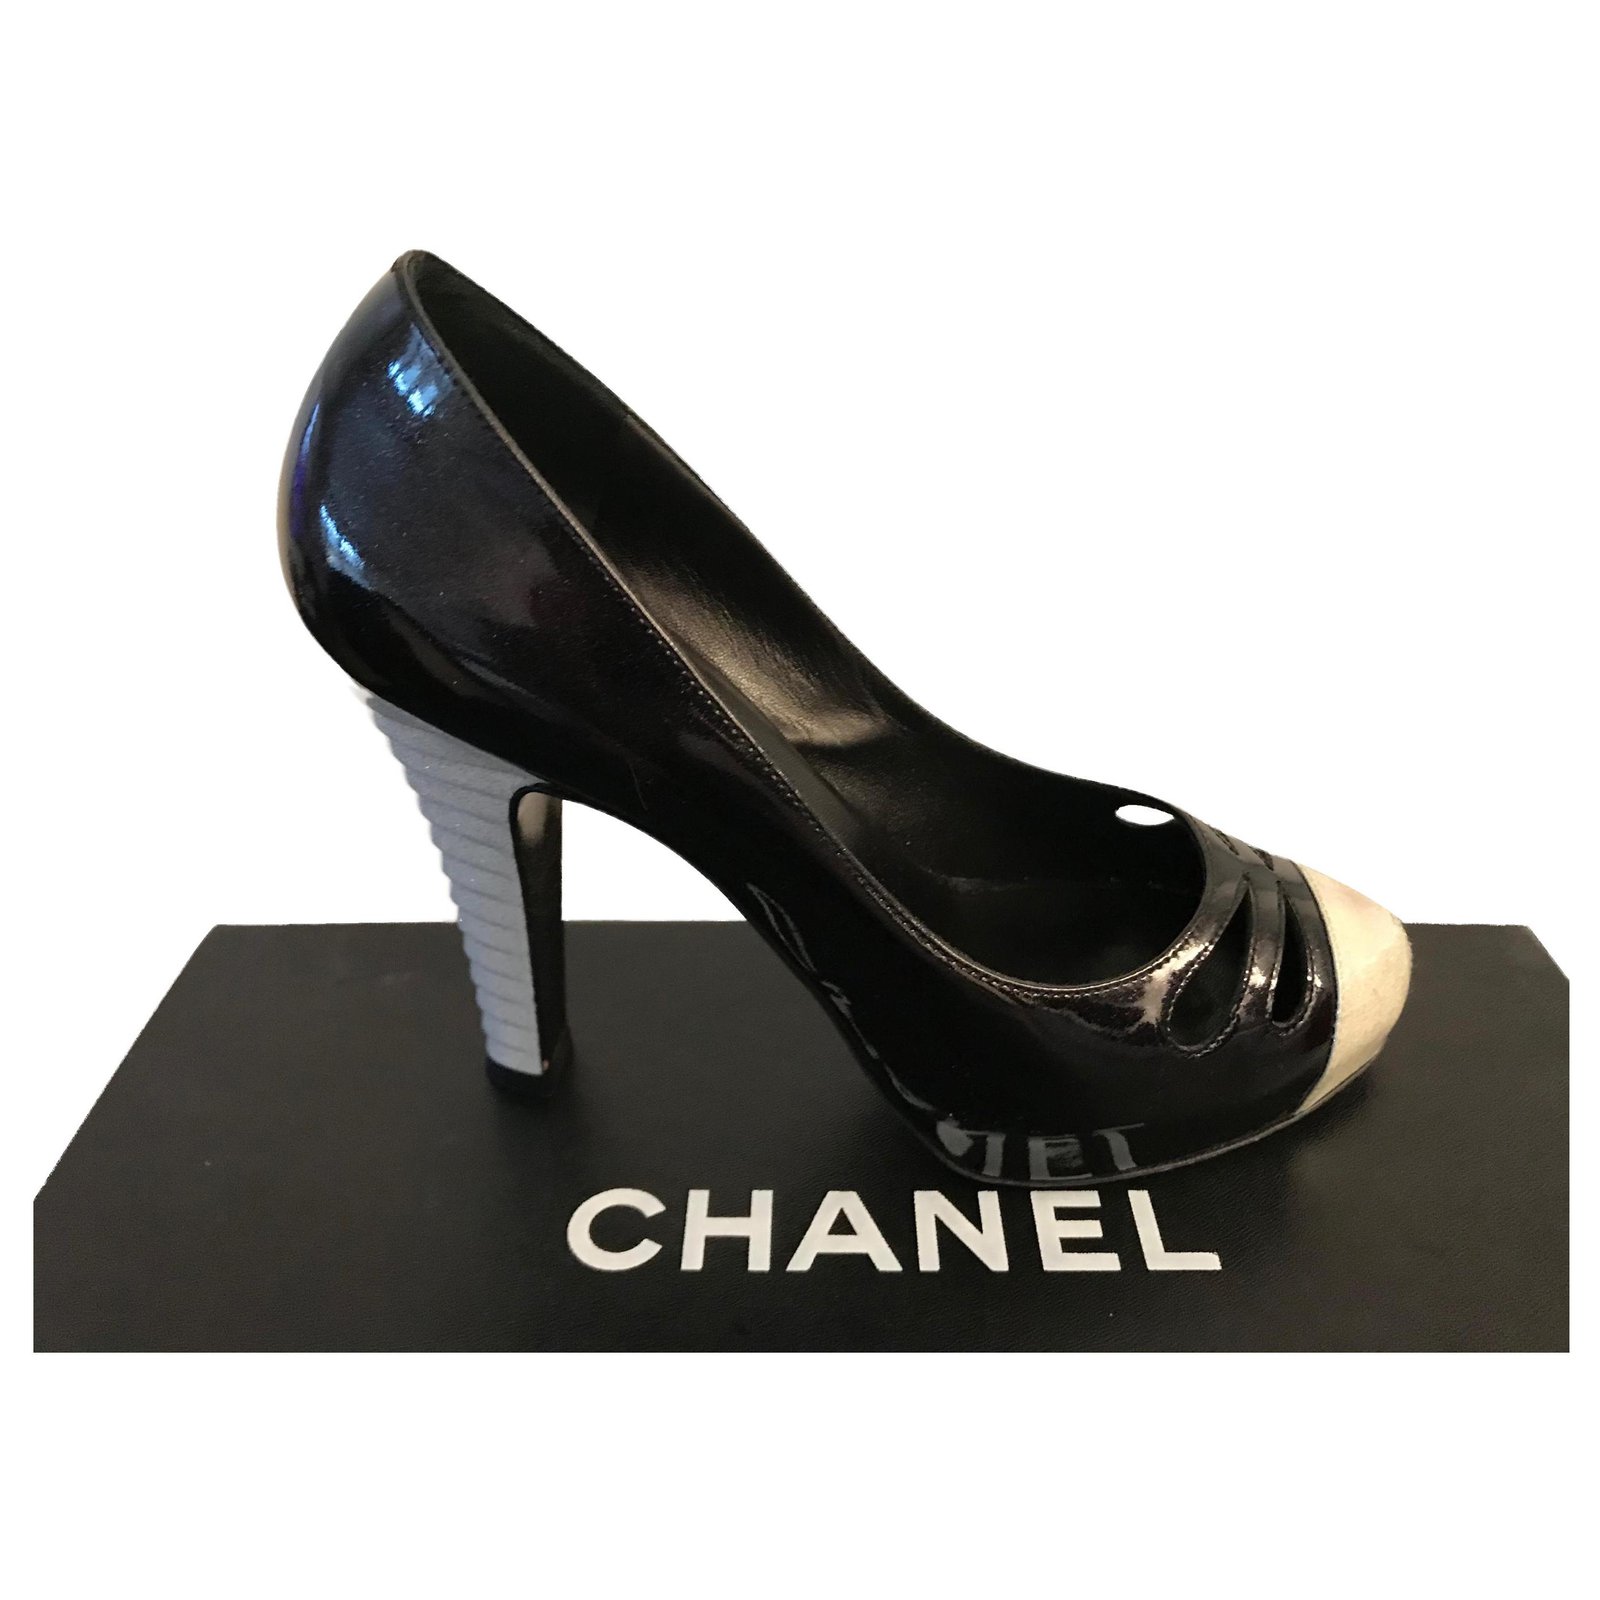 CHANEL BLACK PATENT LEATHER LACE UP HEEL BROGUES SIZE 6/39